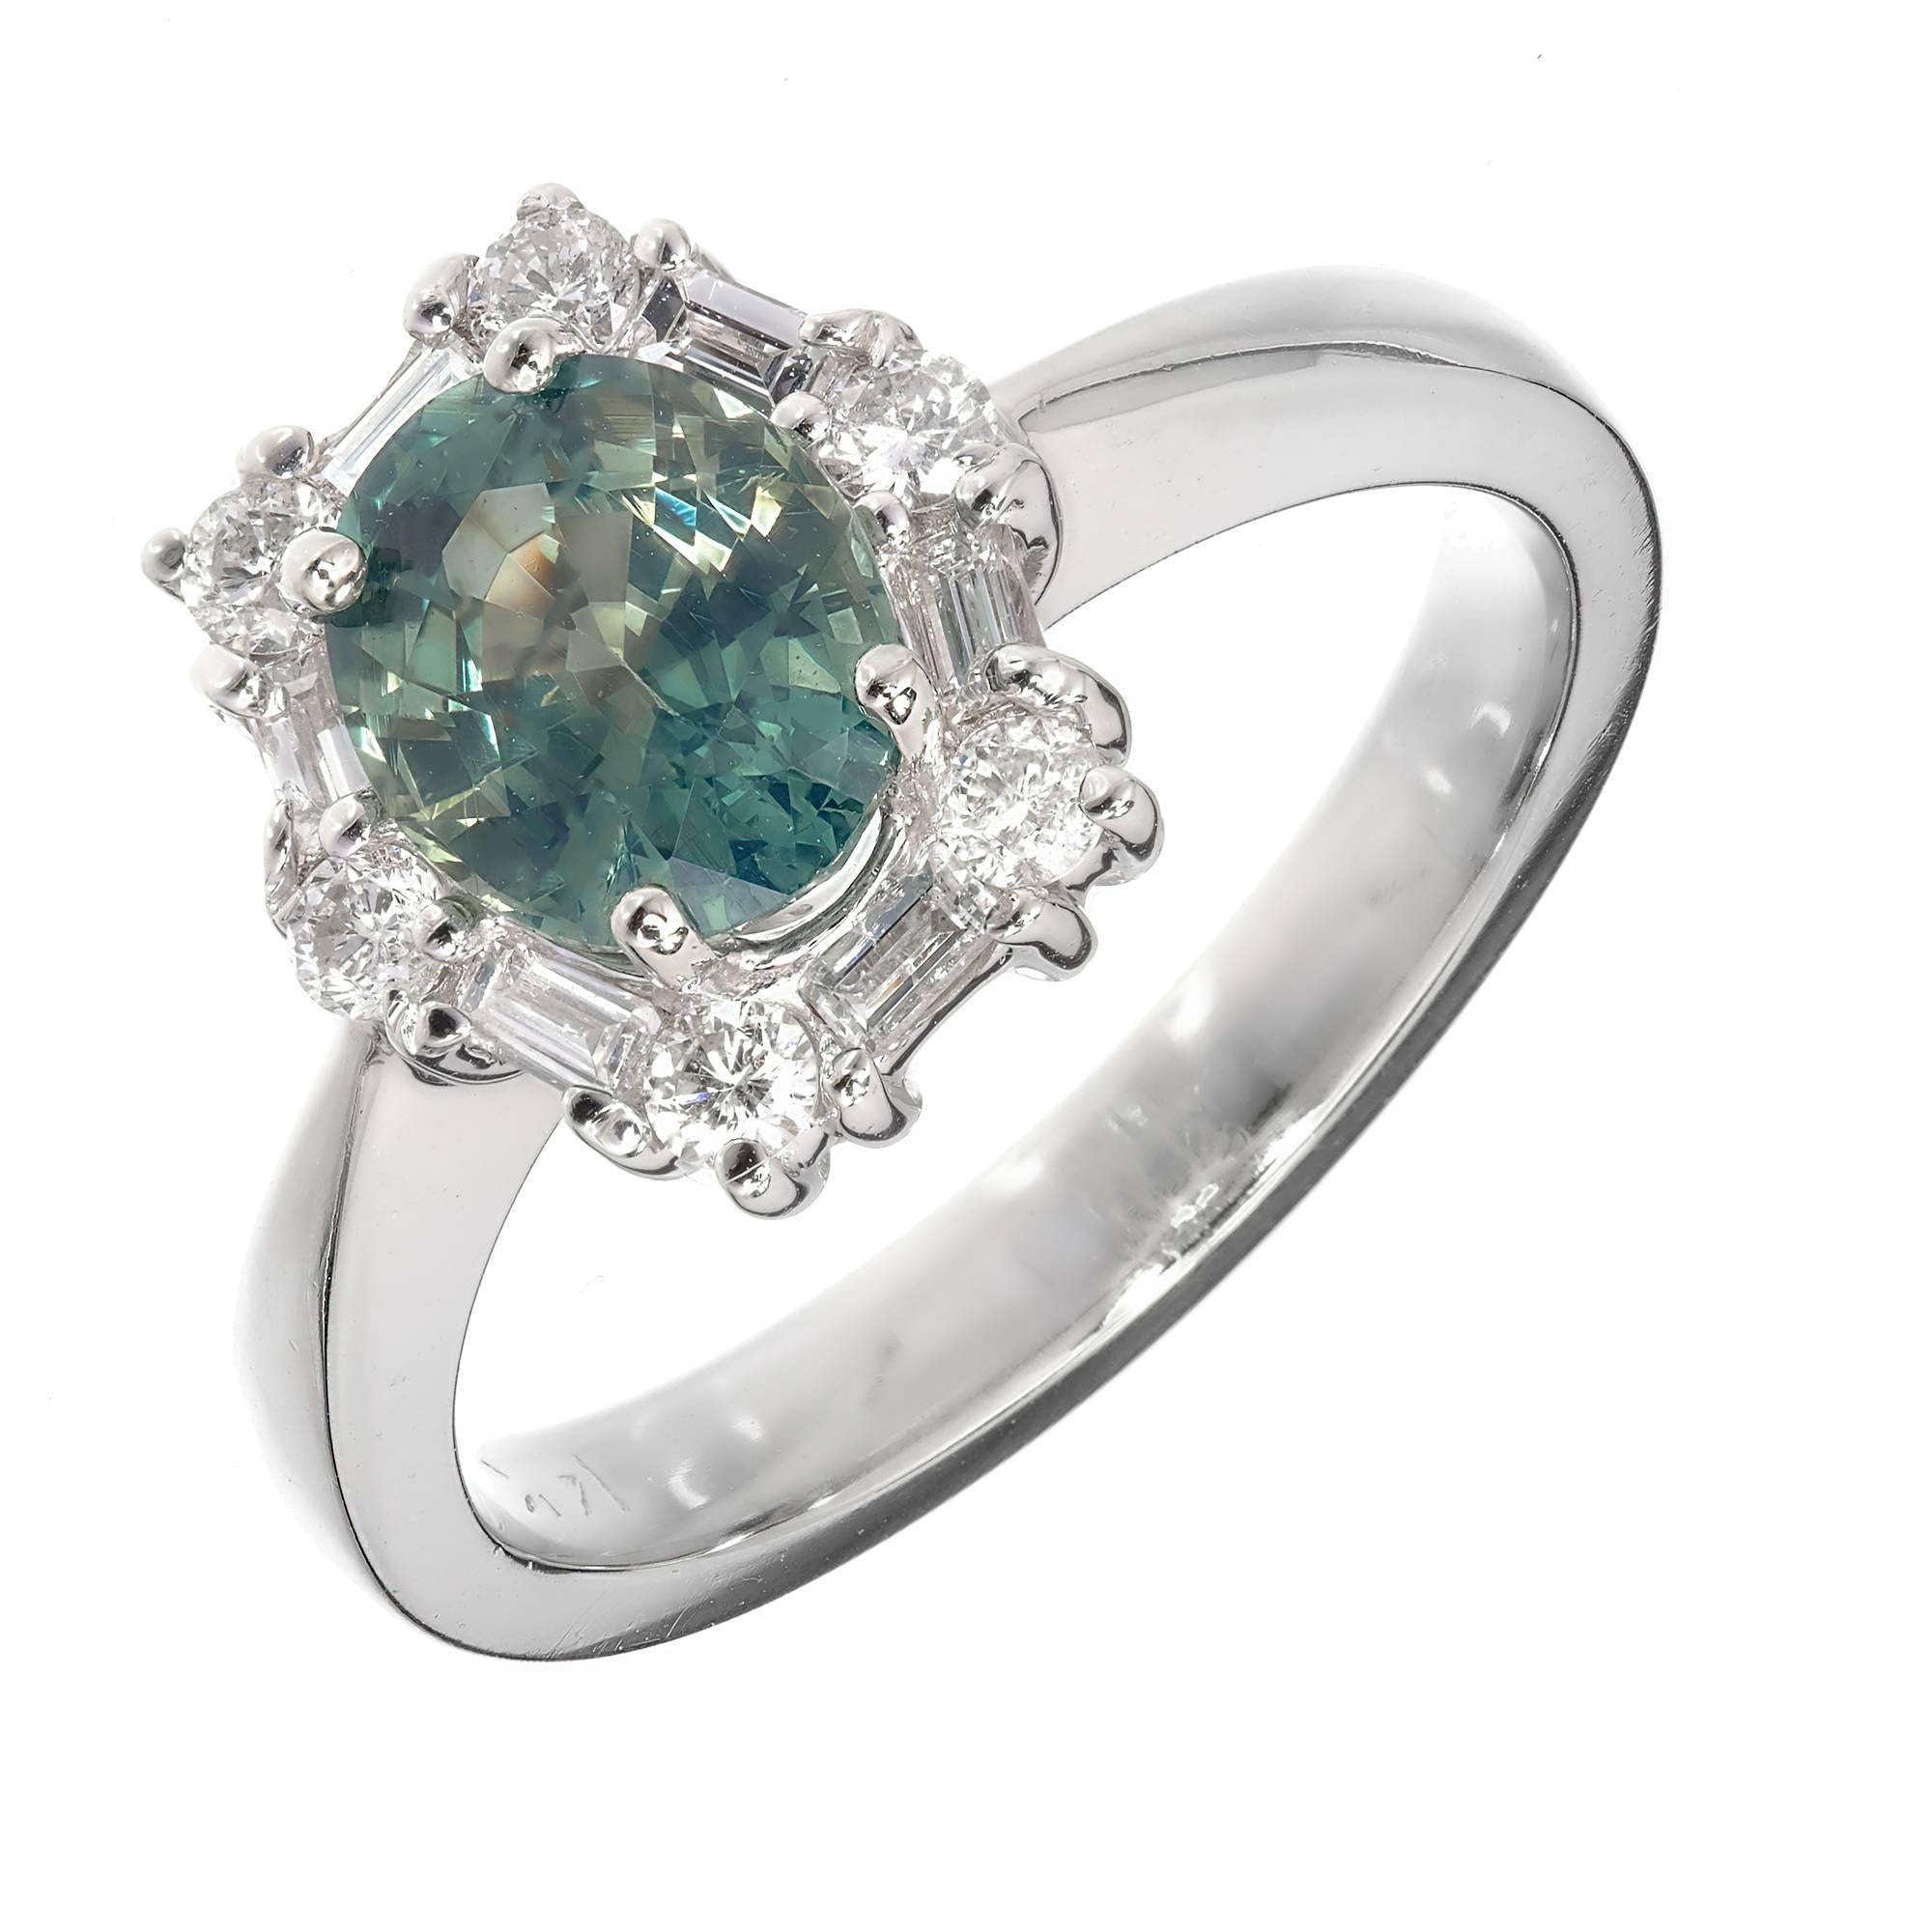 Natural bright clear blue green Sapphire and diamond engagement ring.  GIA certified no heat no enhancements. Original 1960’s 14k white gold halo setting . Stone removed for GIA certification and reset.

1 oval blueish green no heat Sapphire,